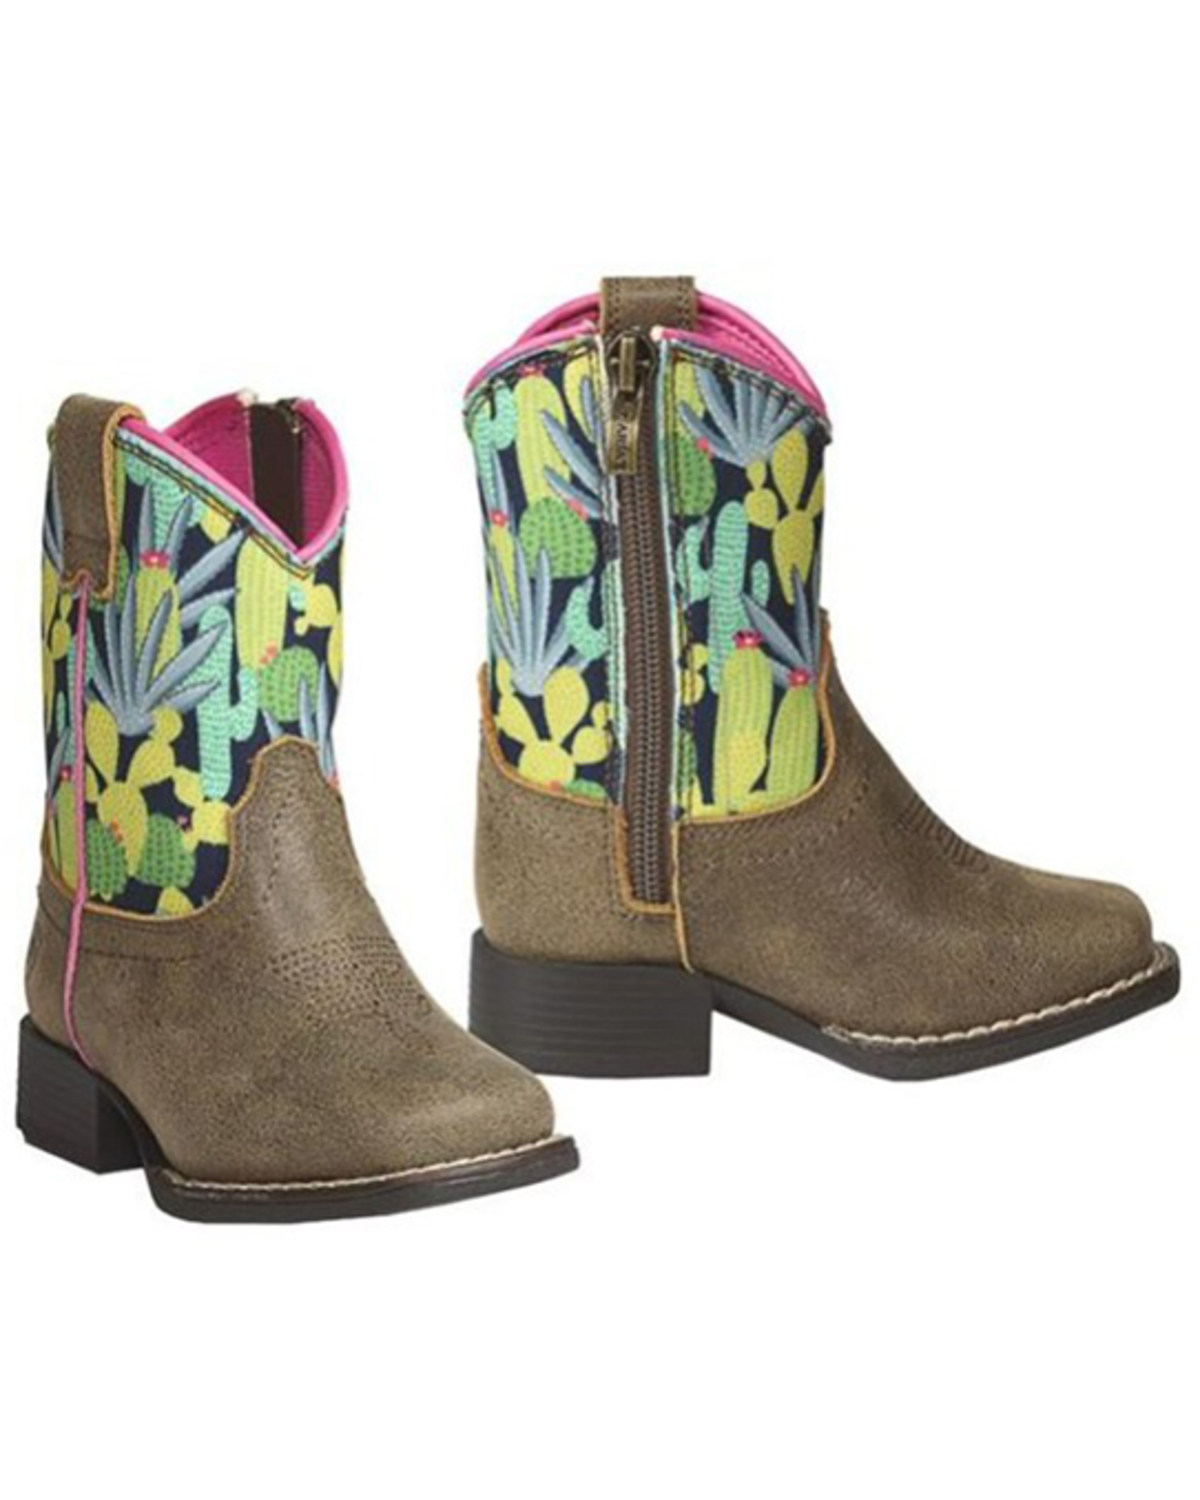 Ariat Kid's Litl Stomper Rosewell Cactus Print Western Boots - Square Toe